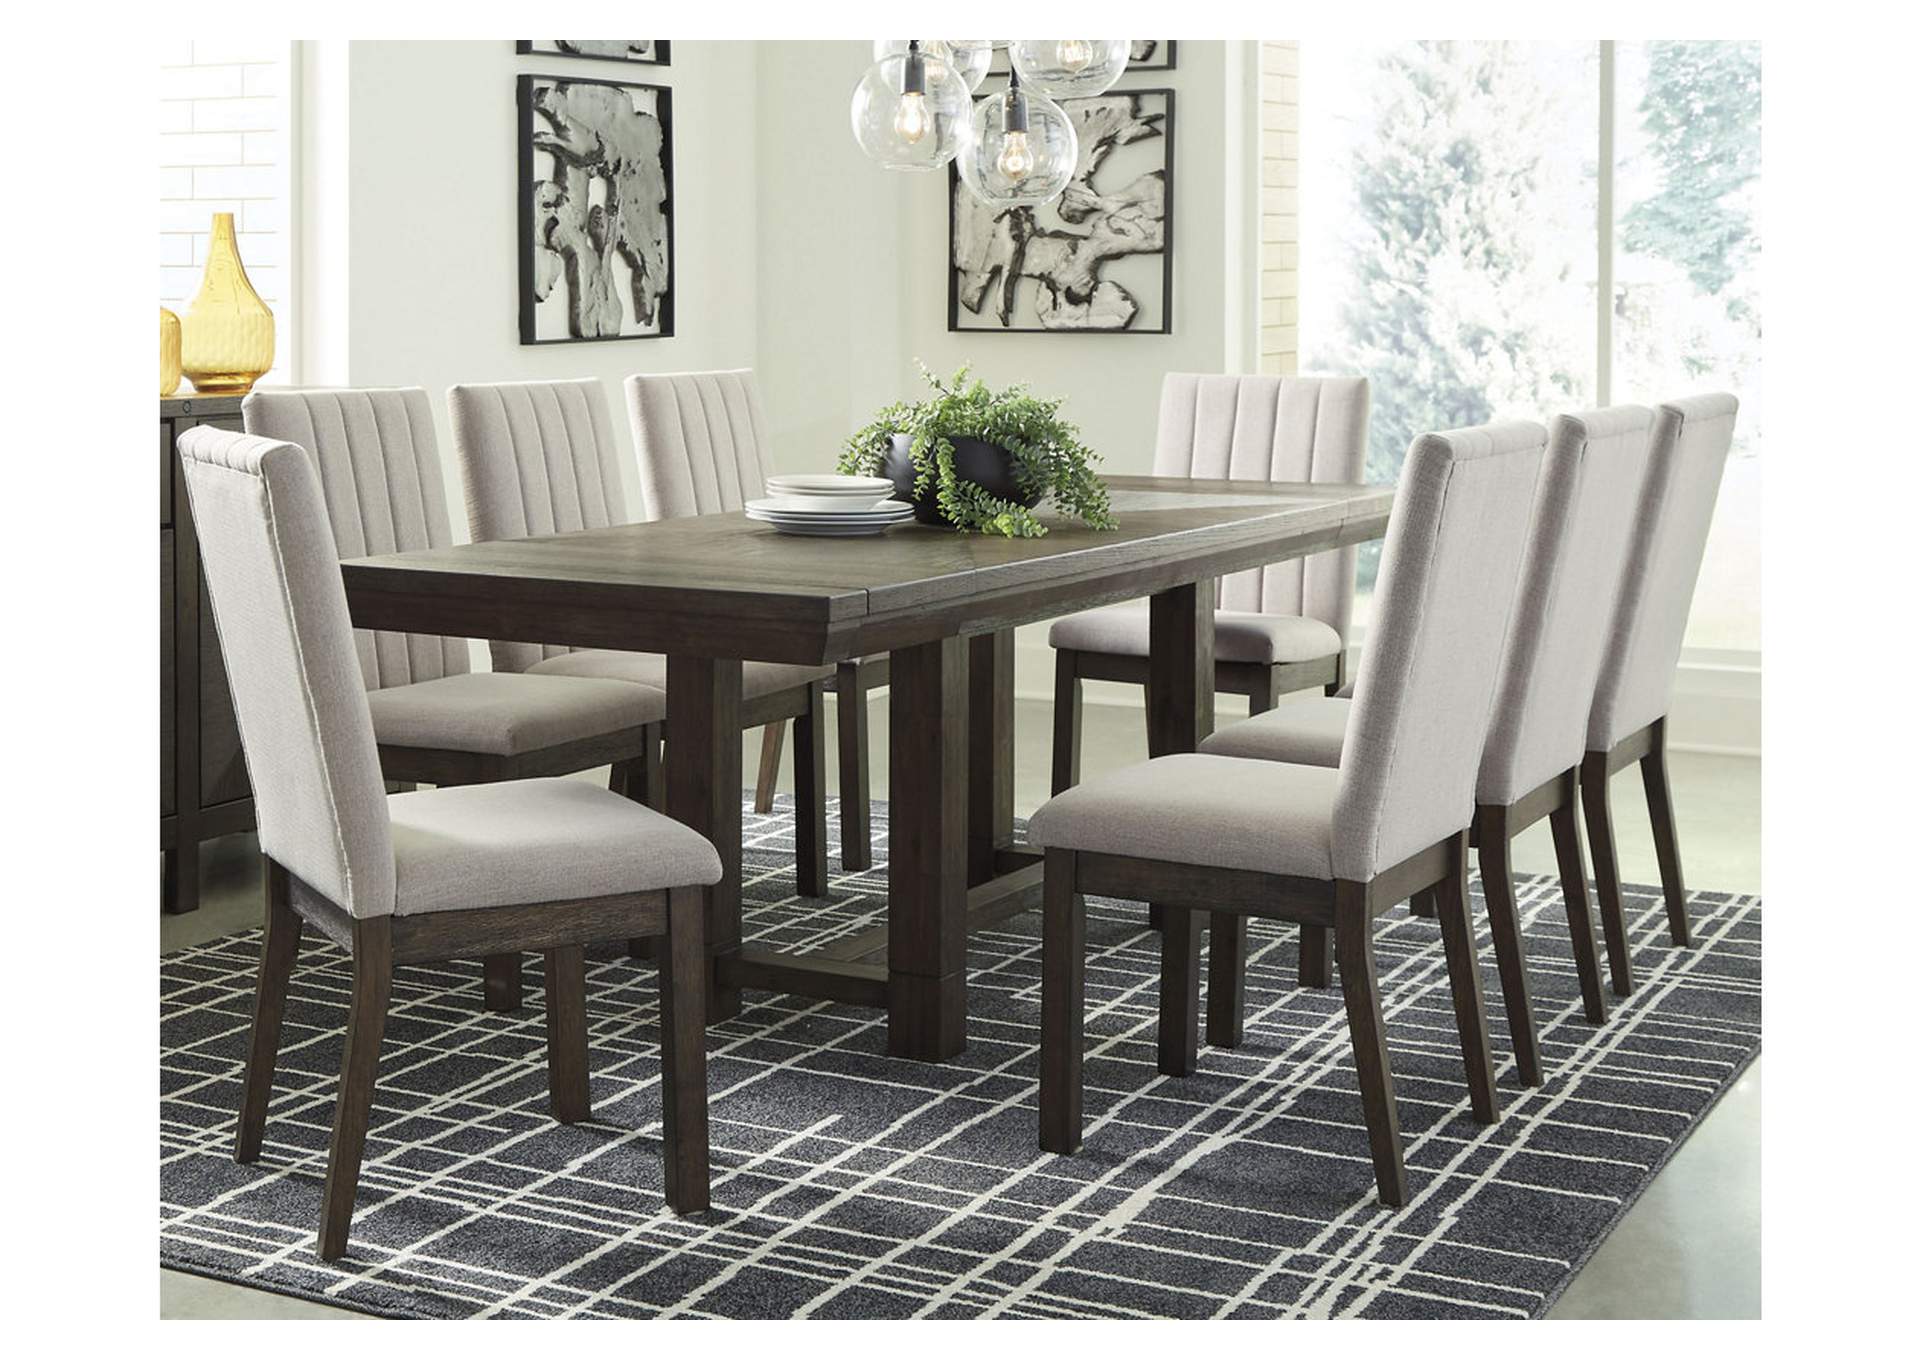 Dellbeck Dining Table and 8 Chairs,Millennium